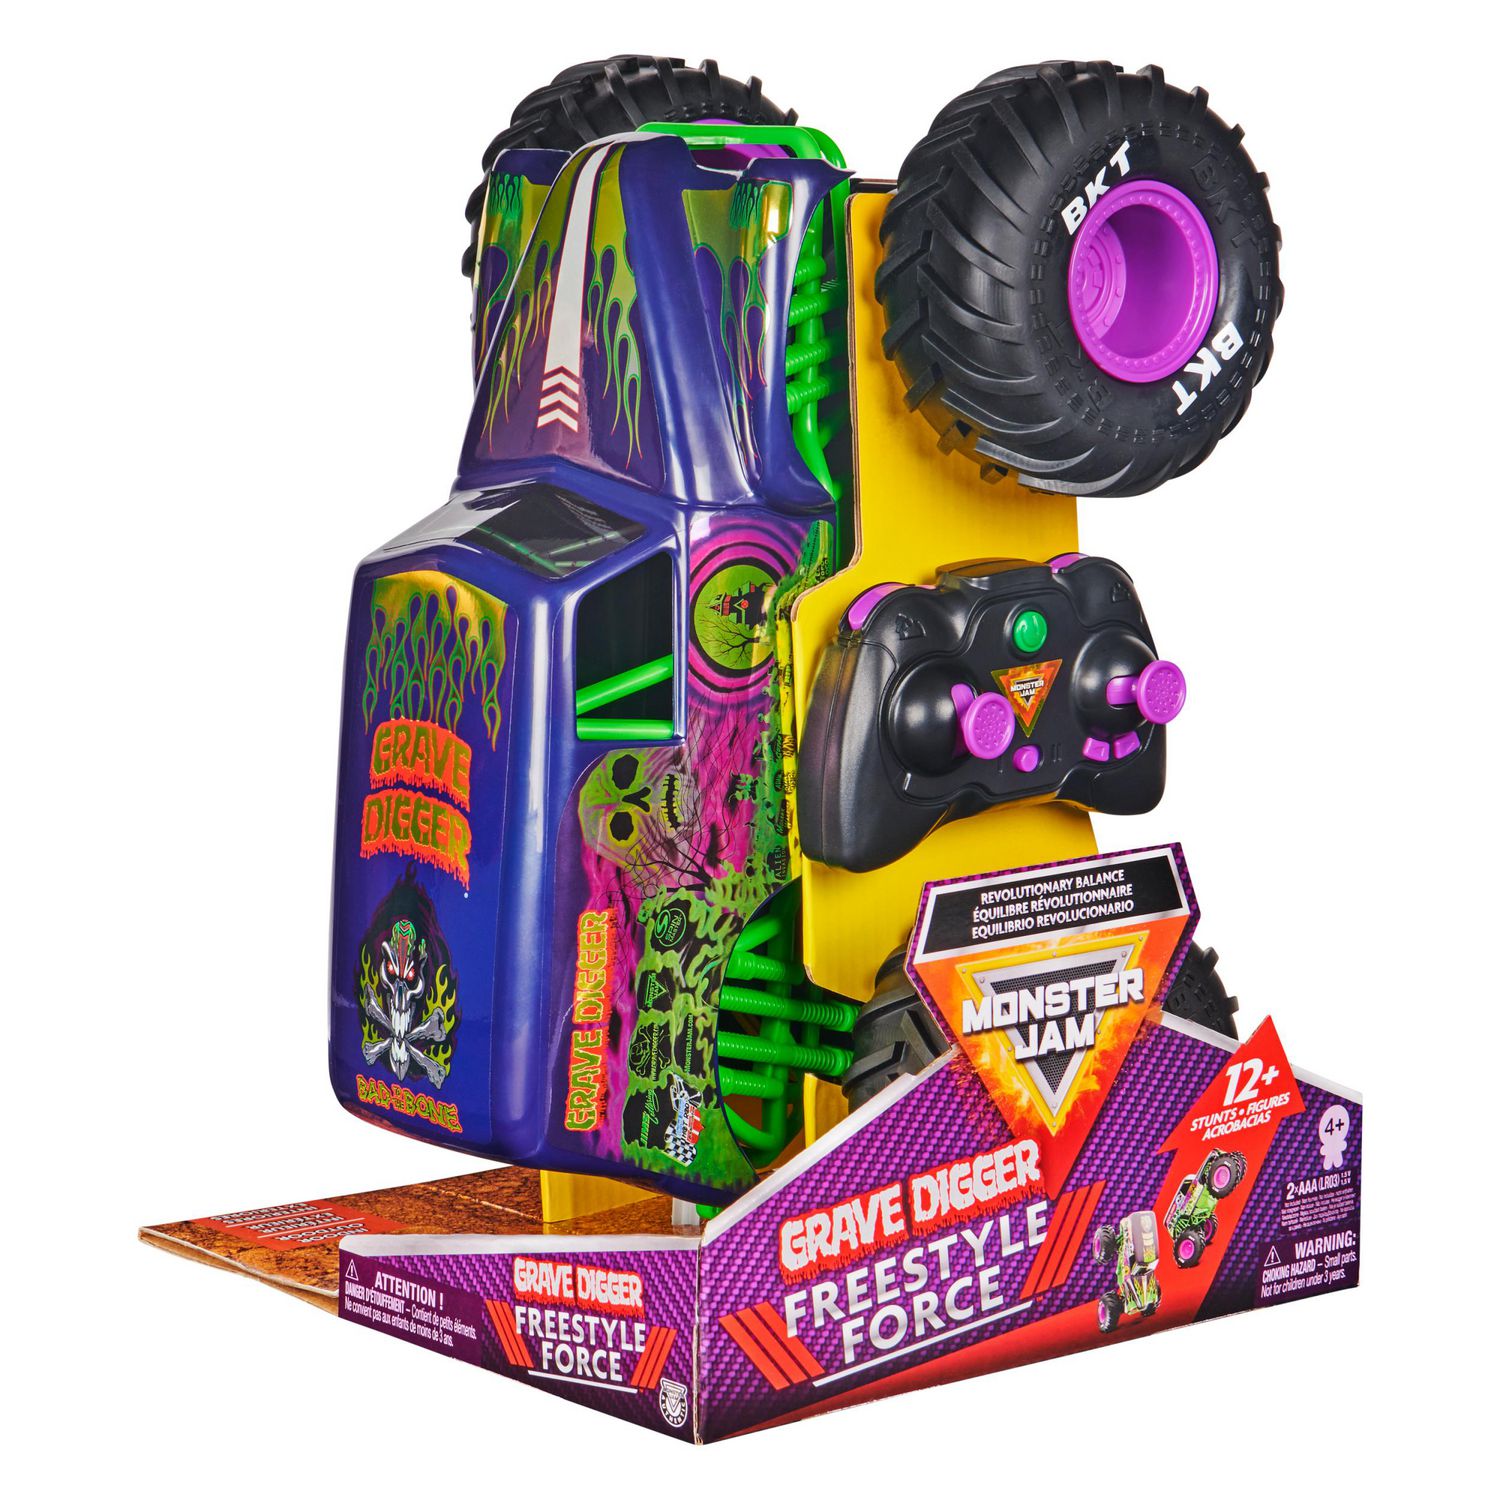 Monster Jam, Official Grave Digger Freestyle Force, Remote Control